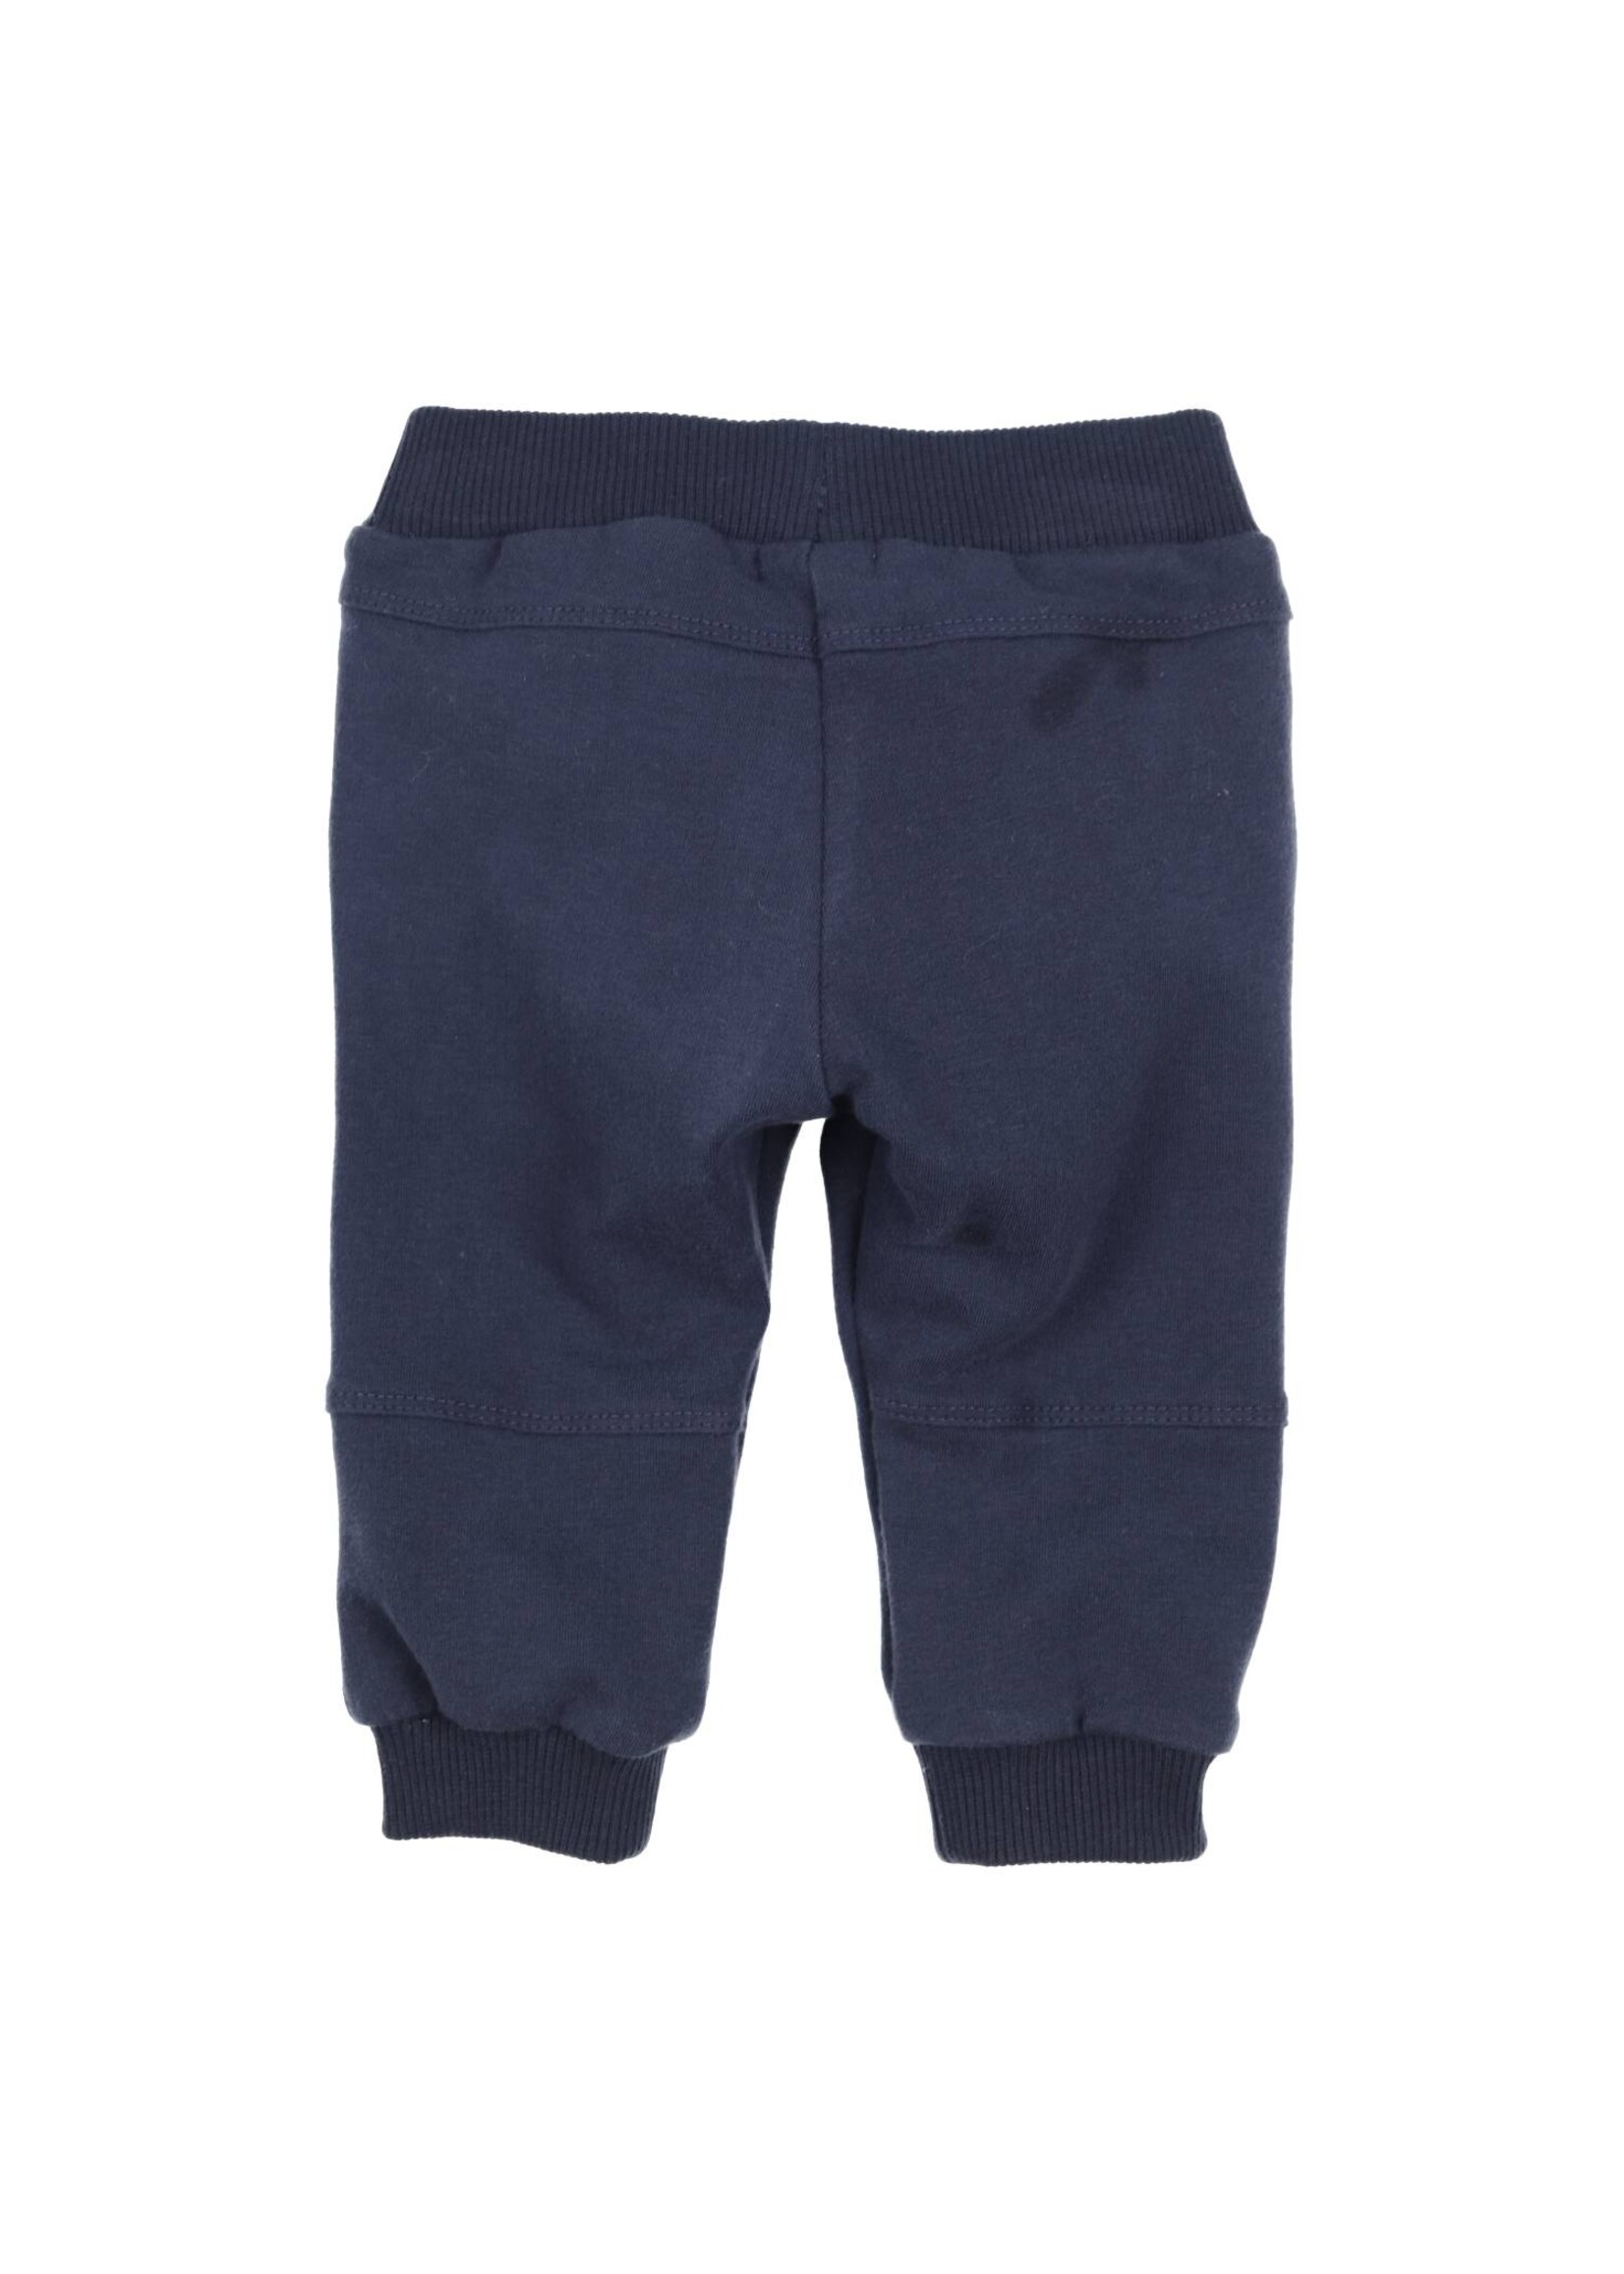 Gymp Boys Trousers Carbon 410-4183-20 Navy